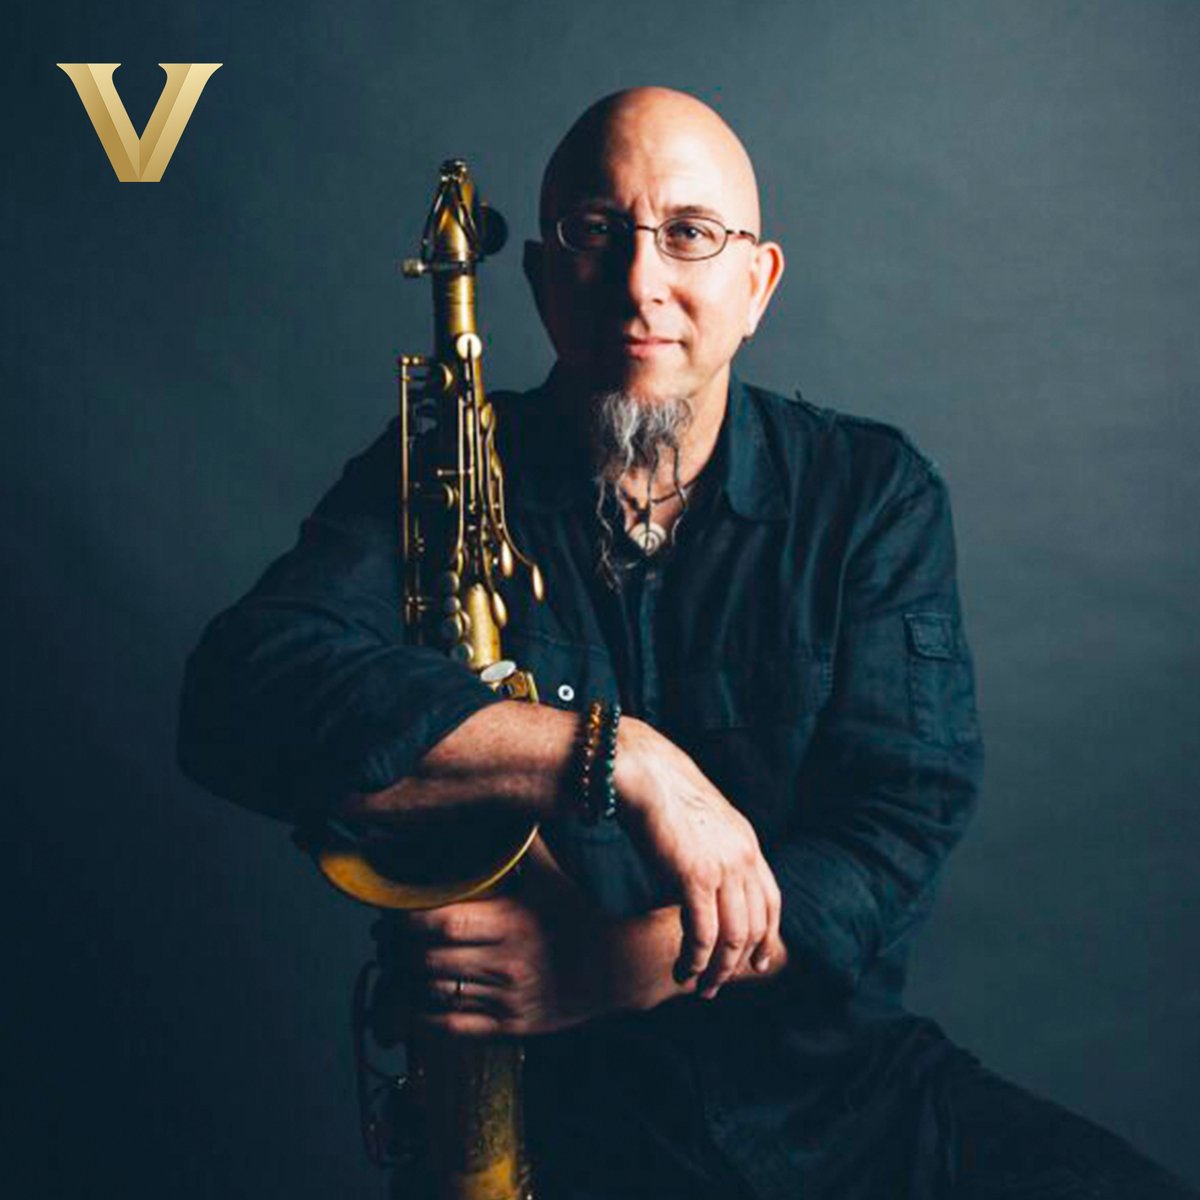 🎉 Blair jazz faculty member Jeff Coffin will be inducted into the Rock & Roll Hall of Fame as a member of the Dave Matthews Band. Coffin is a 3x Grammy winner and joined the DMB in 2009. ⭐ Congrats from everyone at Blair School of Music! Read more: vu.edu/dmb-rockhall